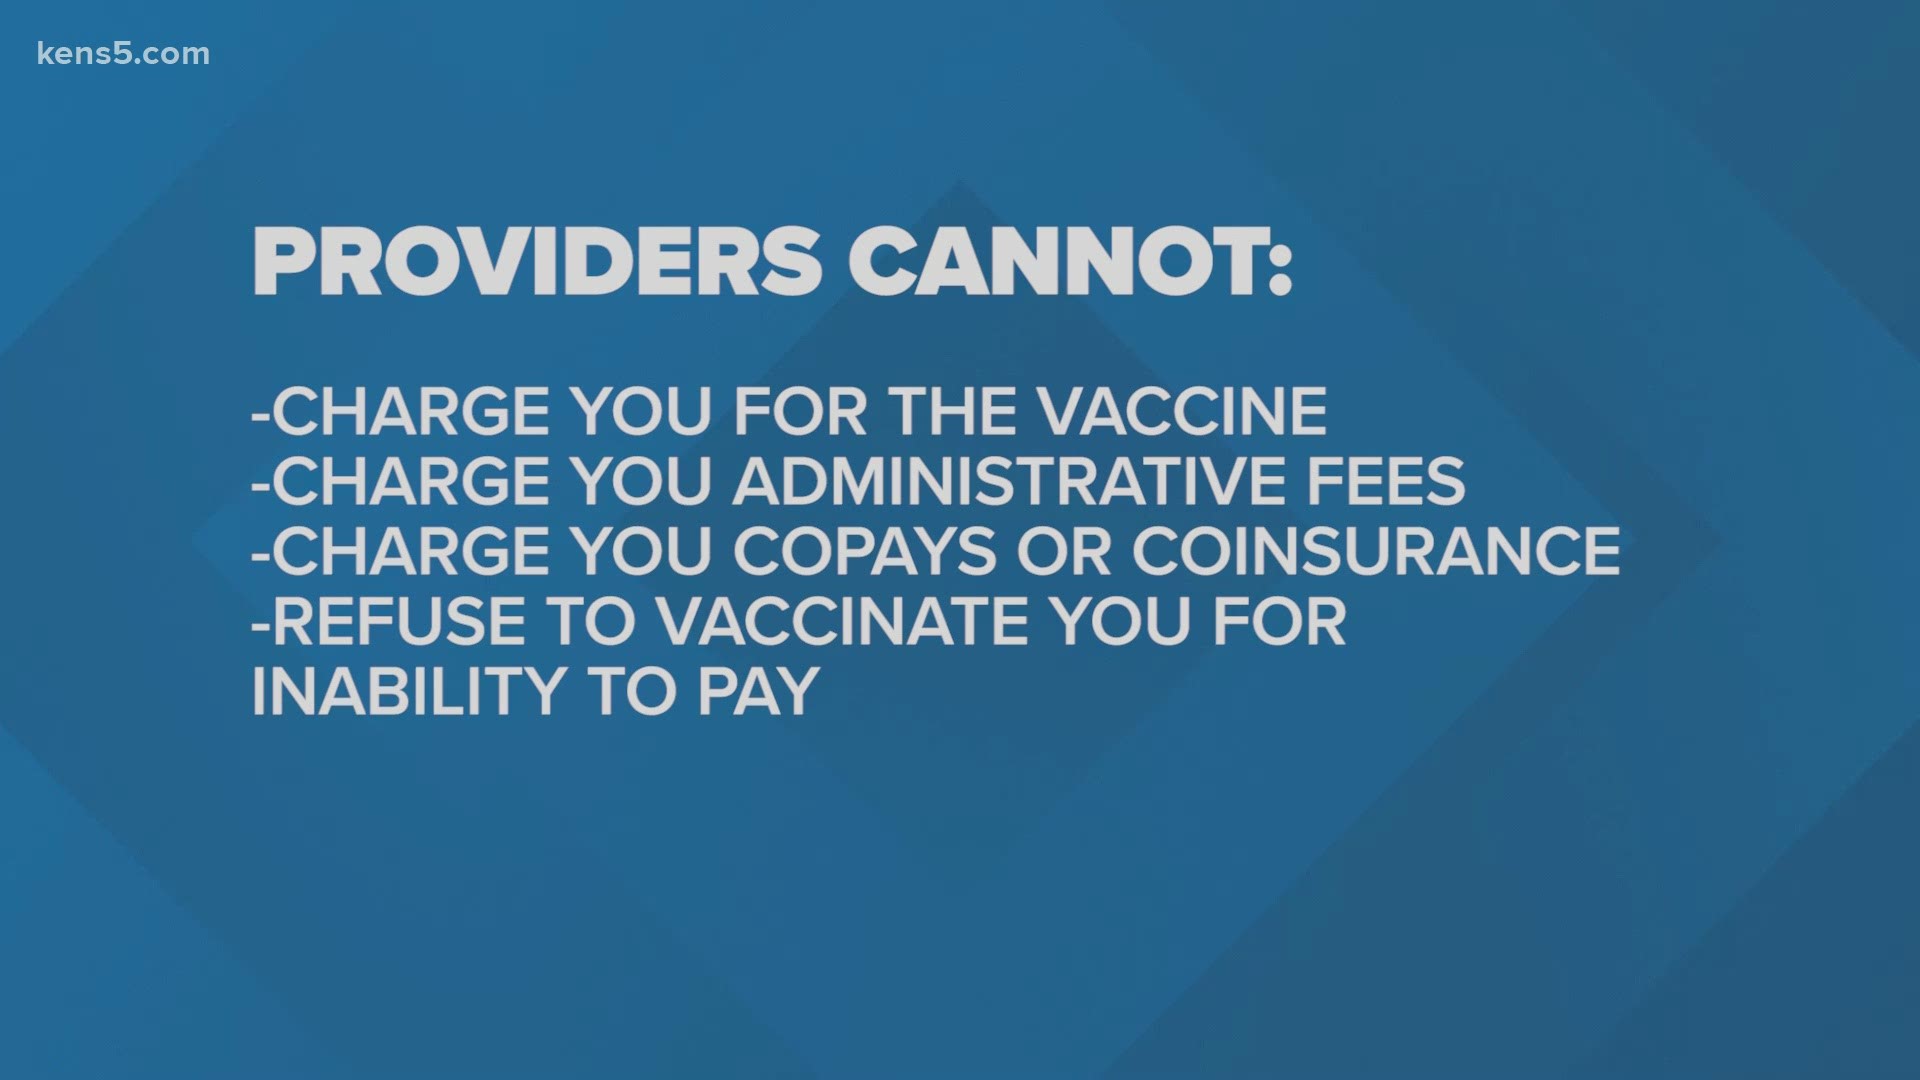 You can only be charged if you receive medical care unrelated to the vaccine.